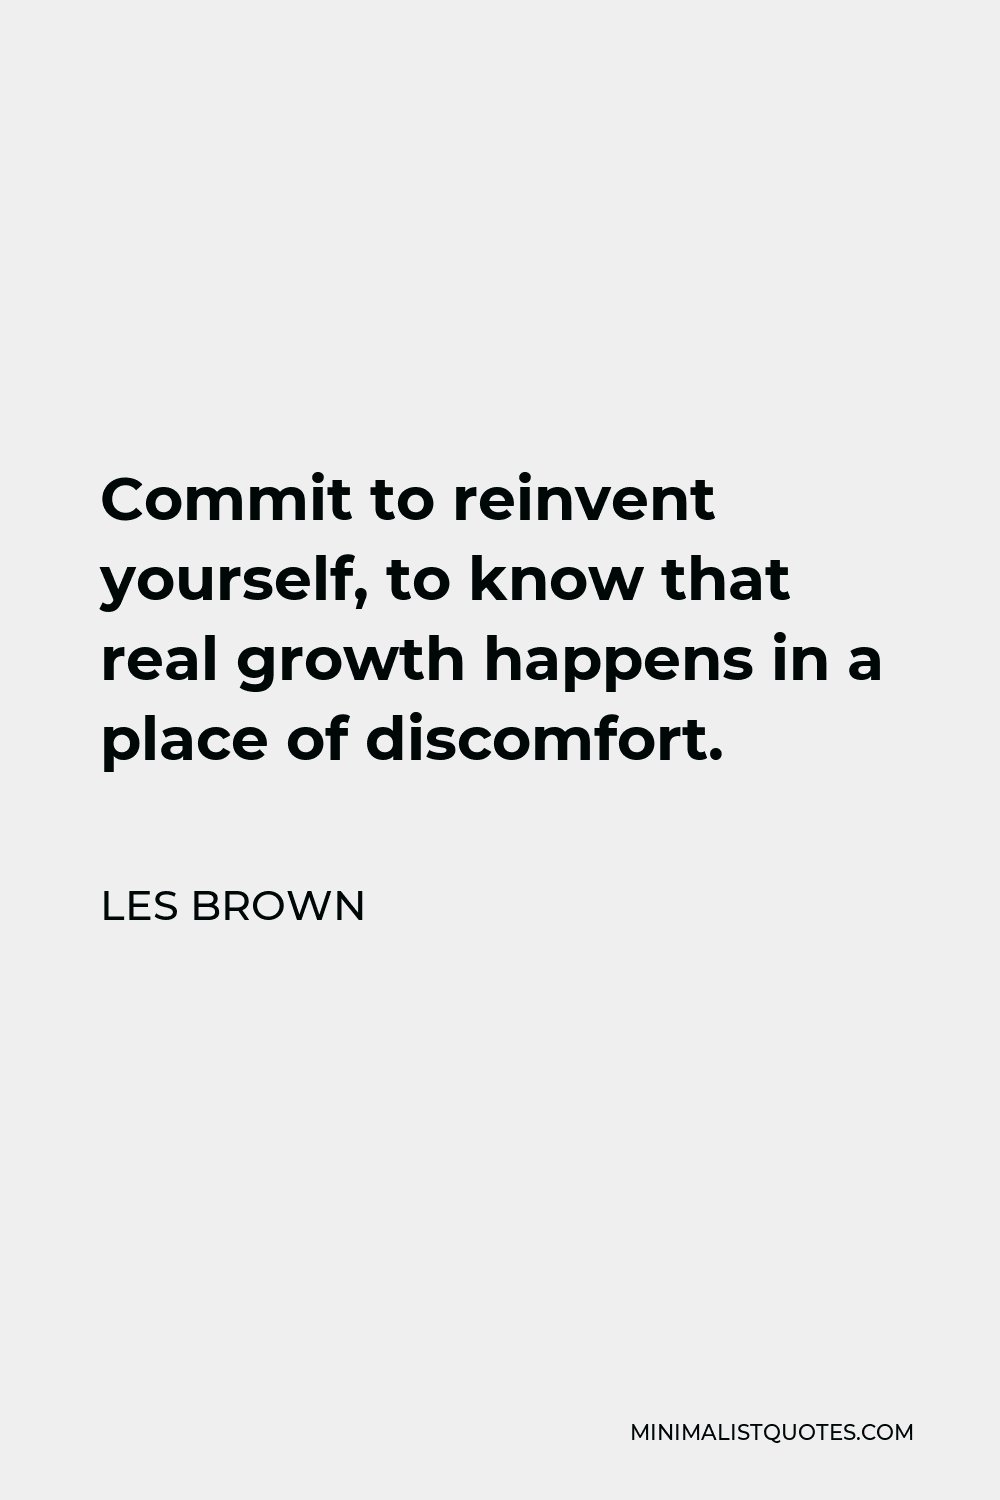 Les Brown Quote - Commit to reinvent yourself, to know that real growth happens in a place of discomfort.